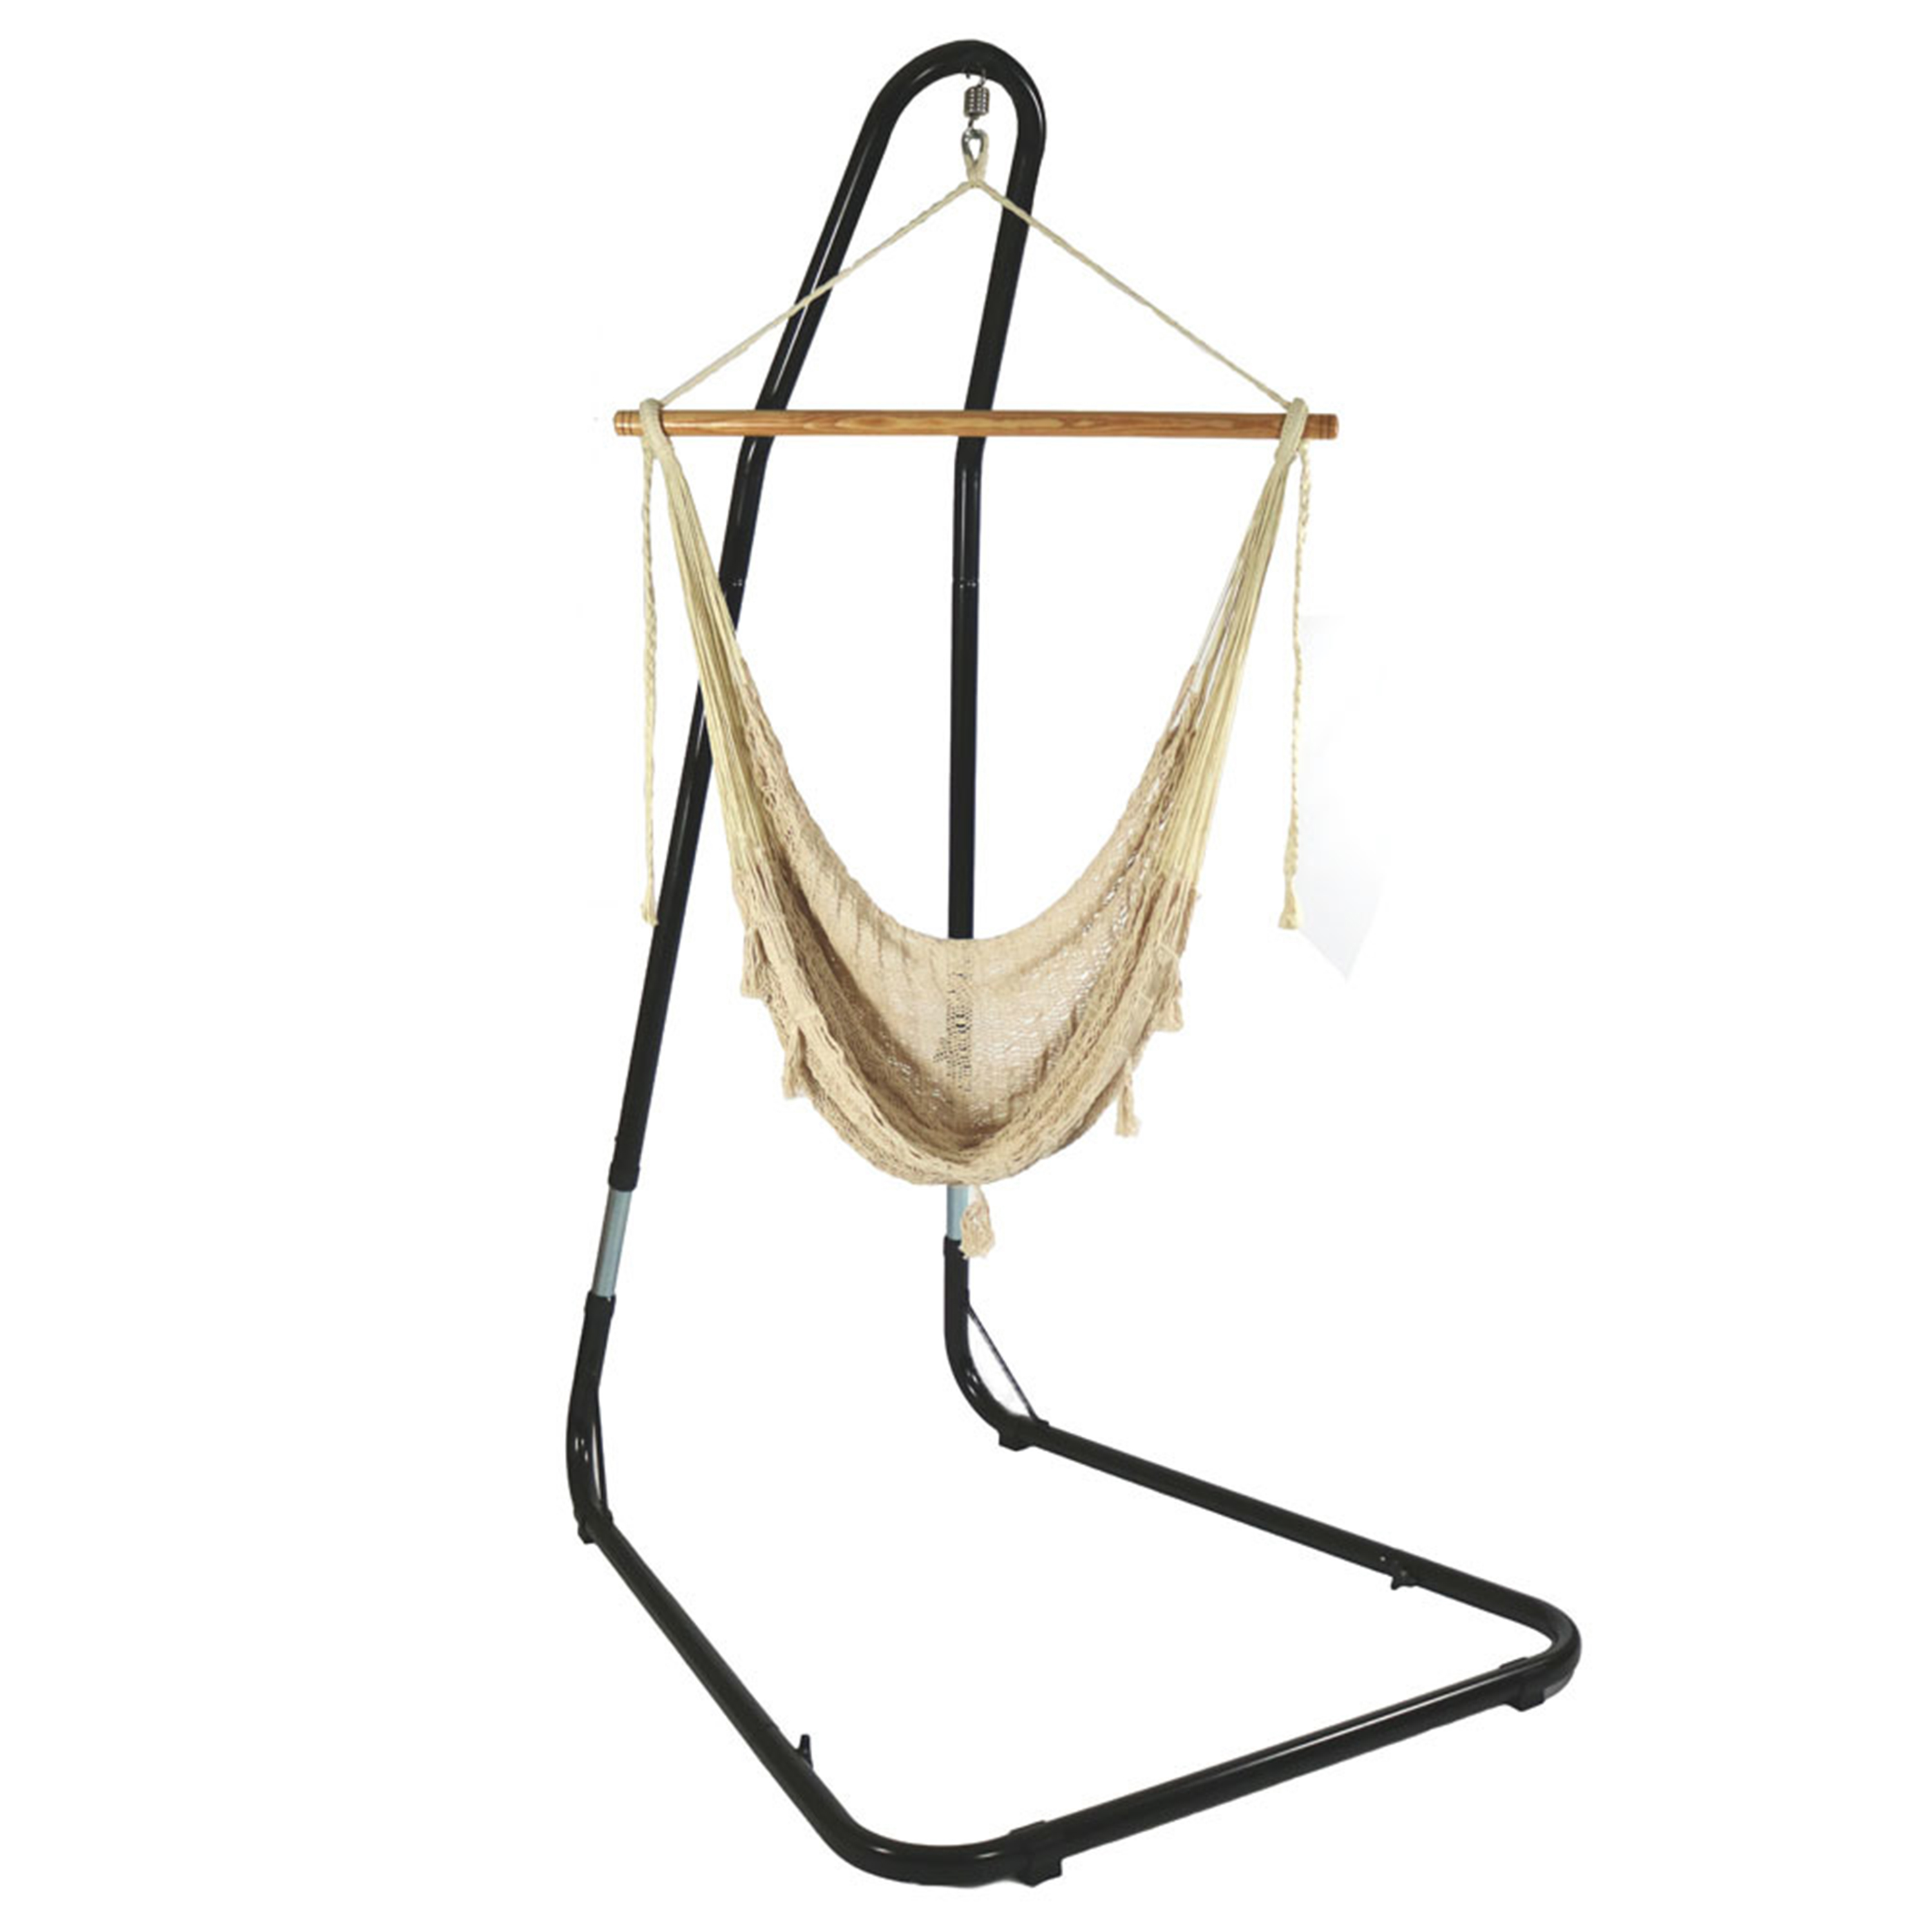 Sunnydaze Mayan Rope Hammock Chair and Adjustable Stand, Comfortable Hanging Swing Seat, Natural, Extra-Large Hammock